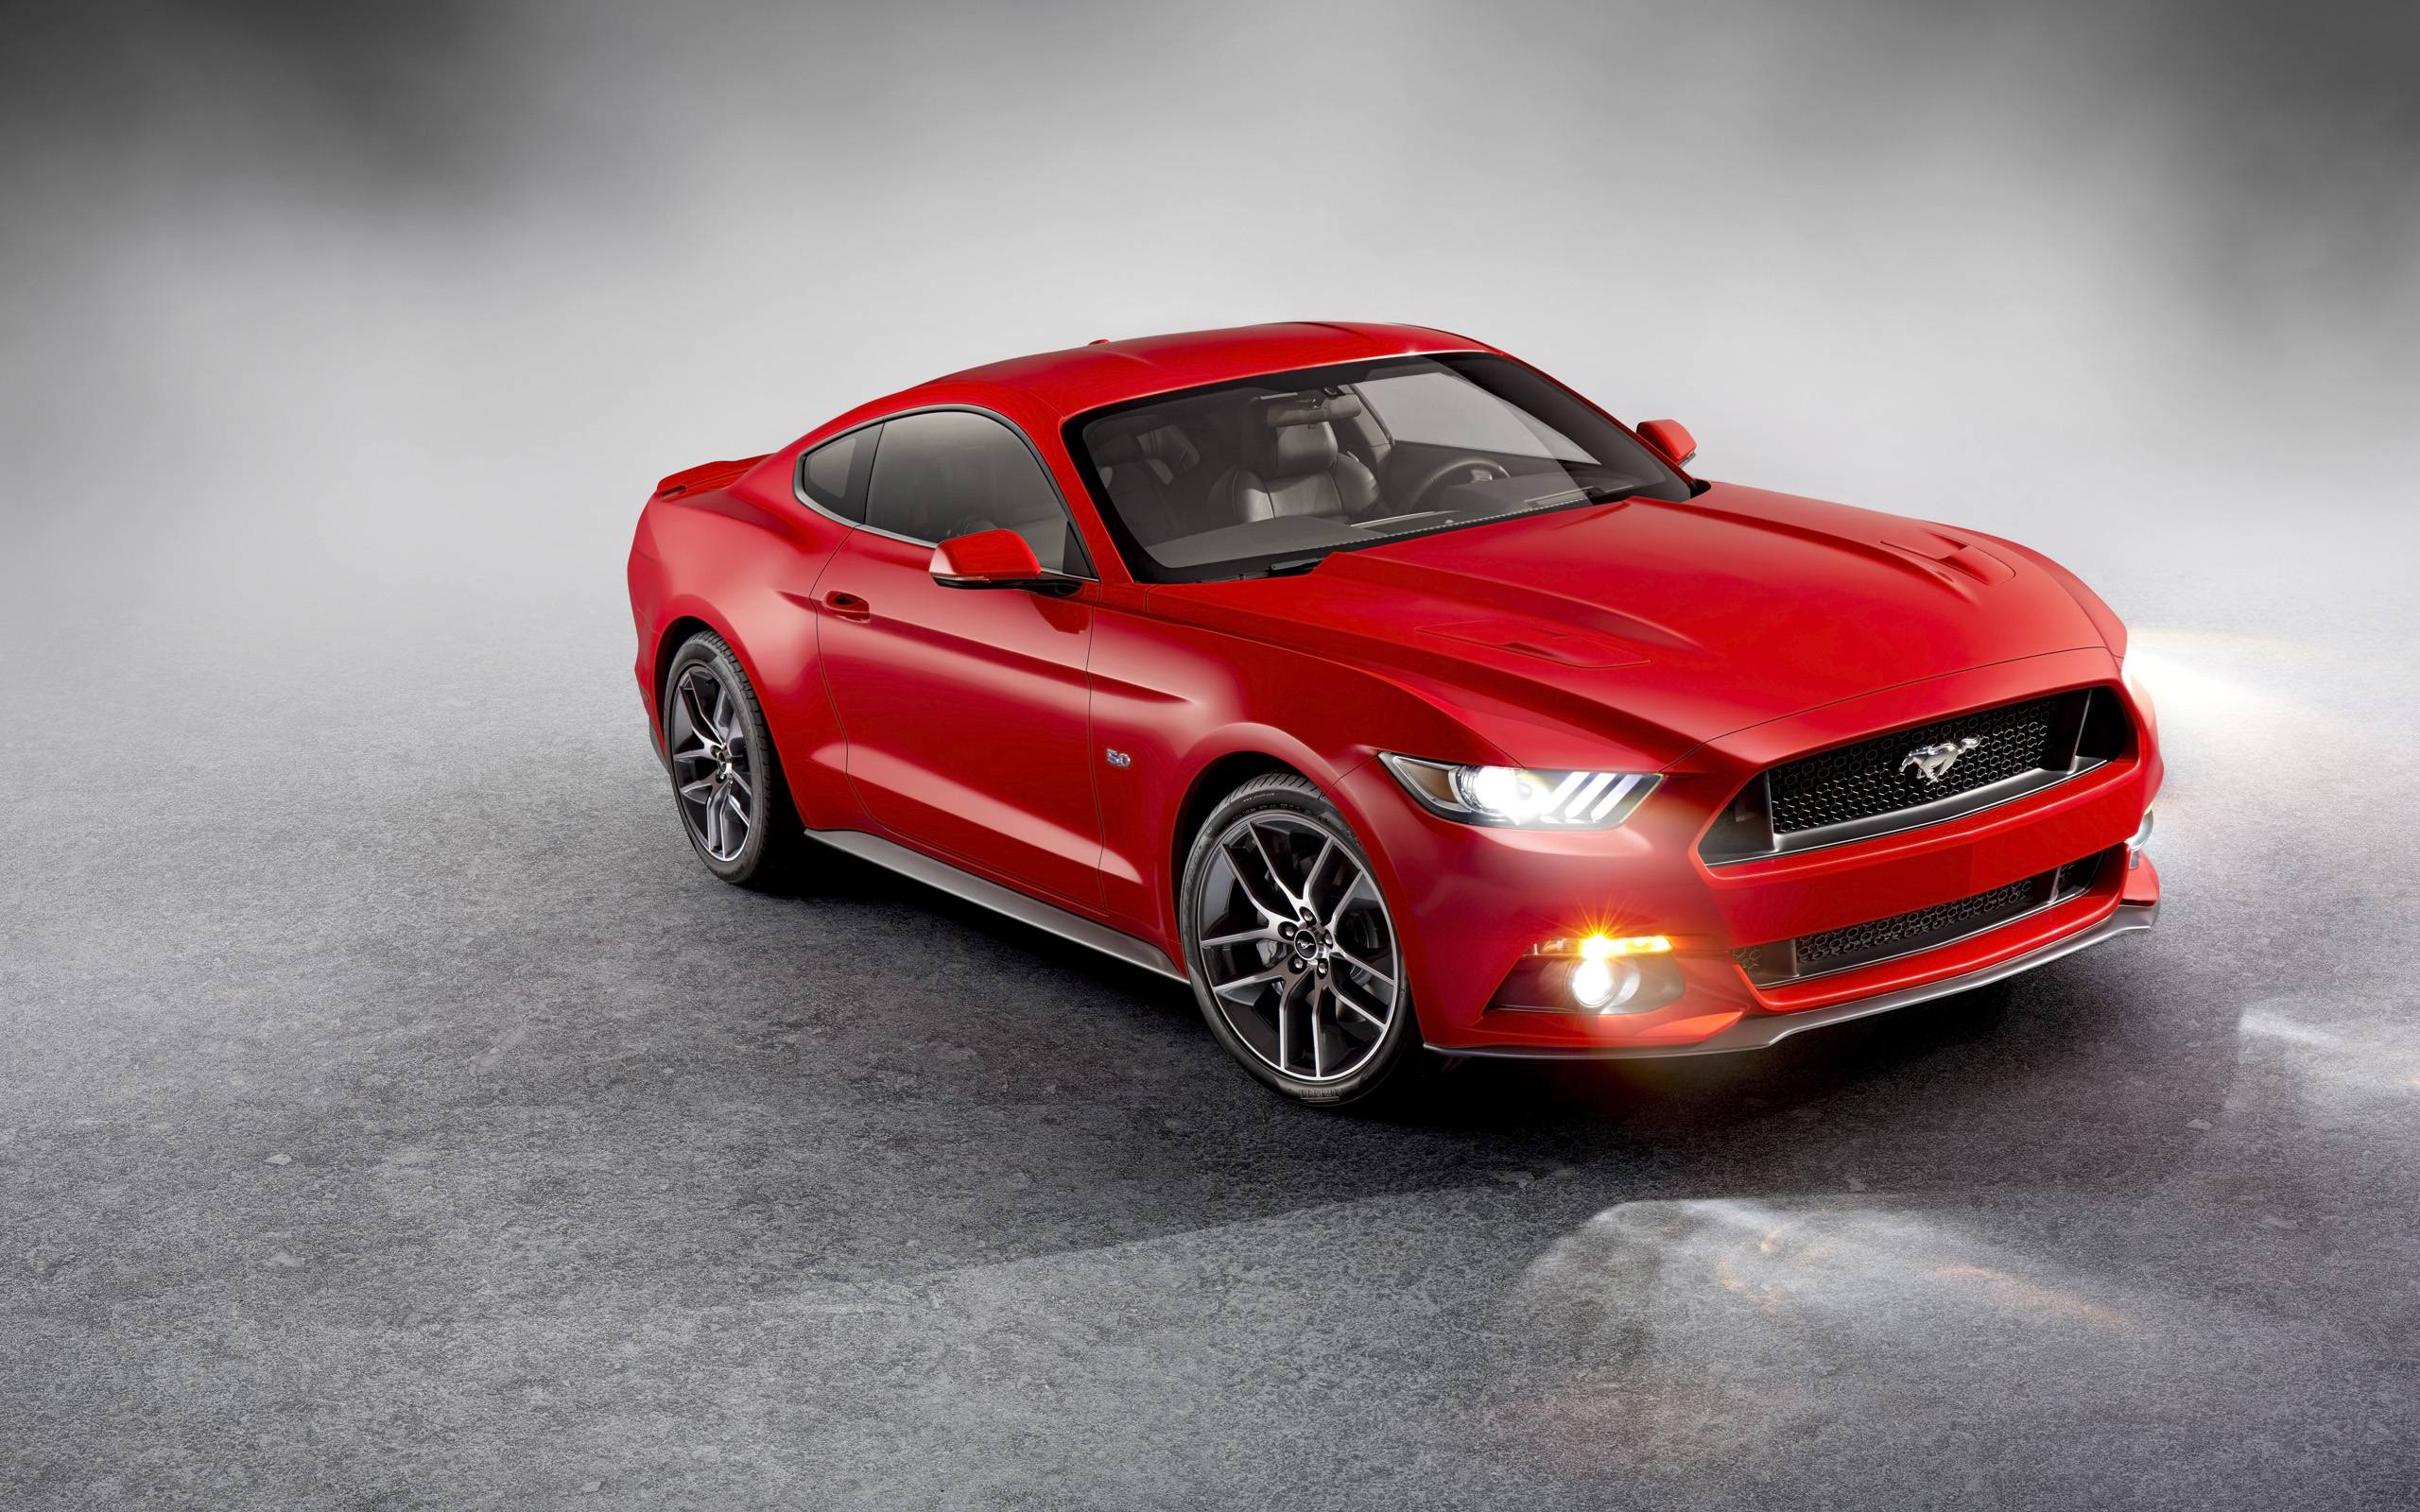 Ford Mustang Car Wallpaper 2560x1600 px